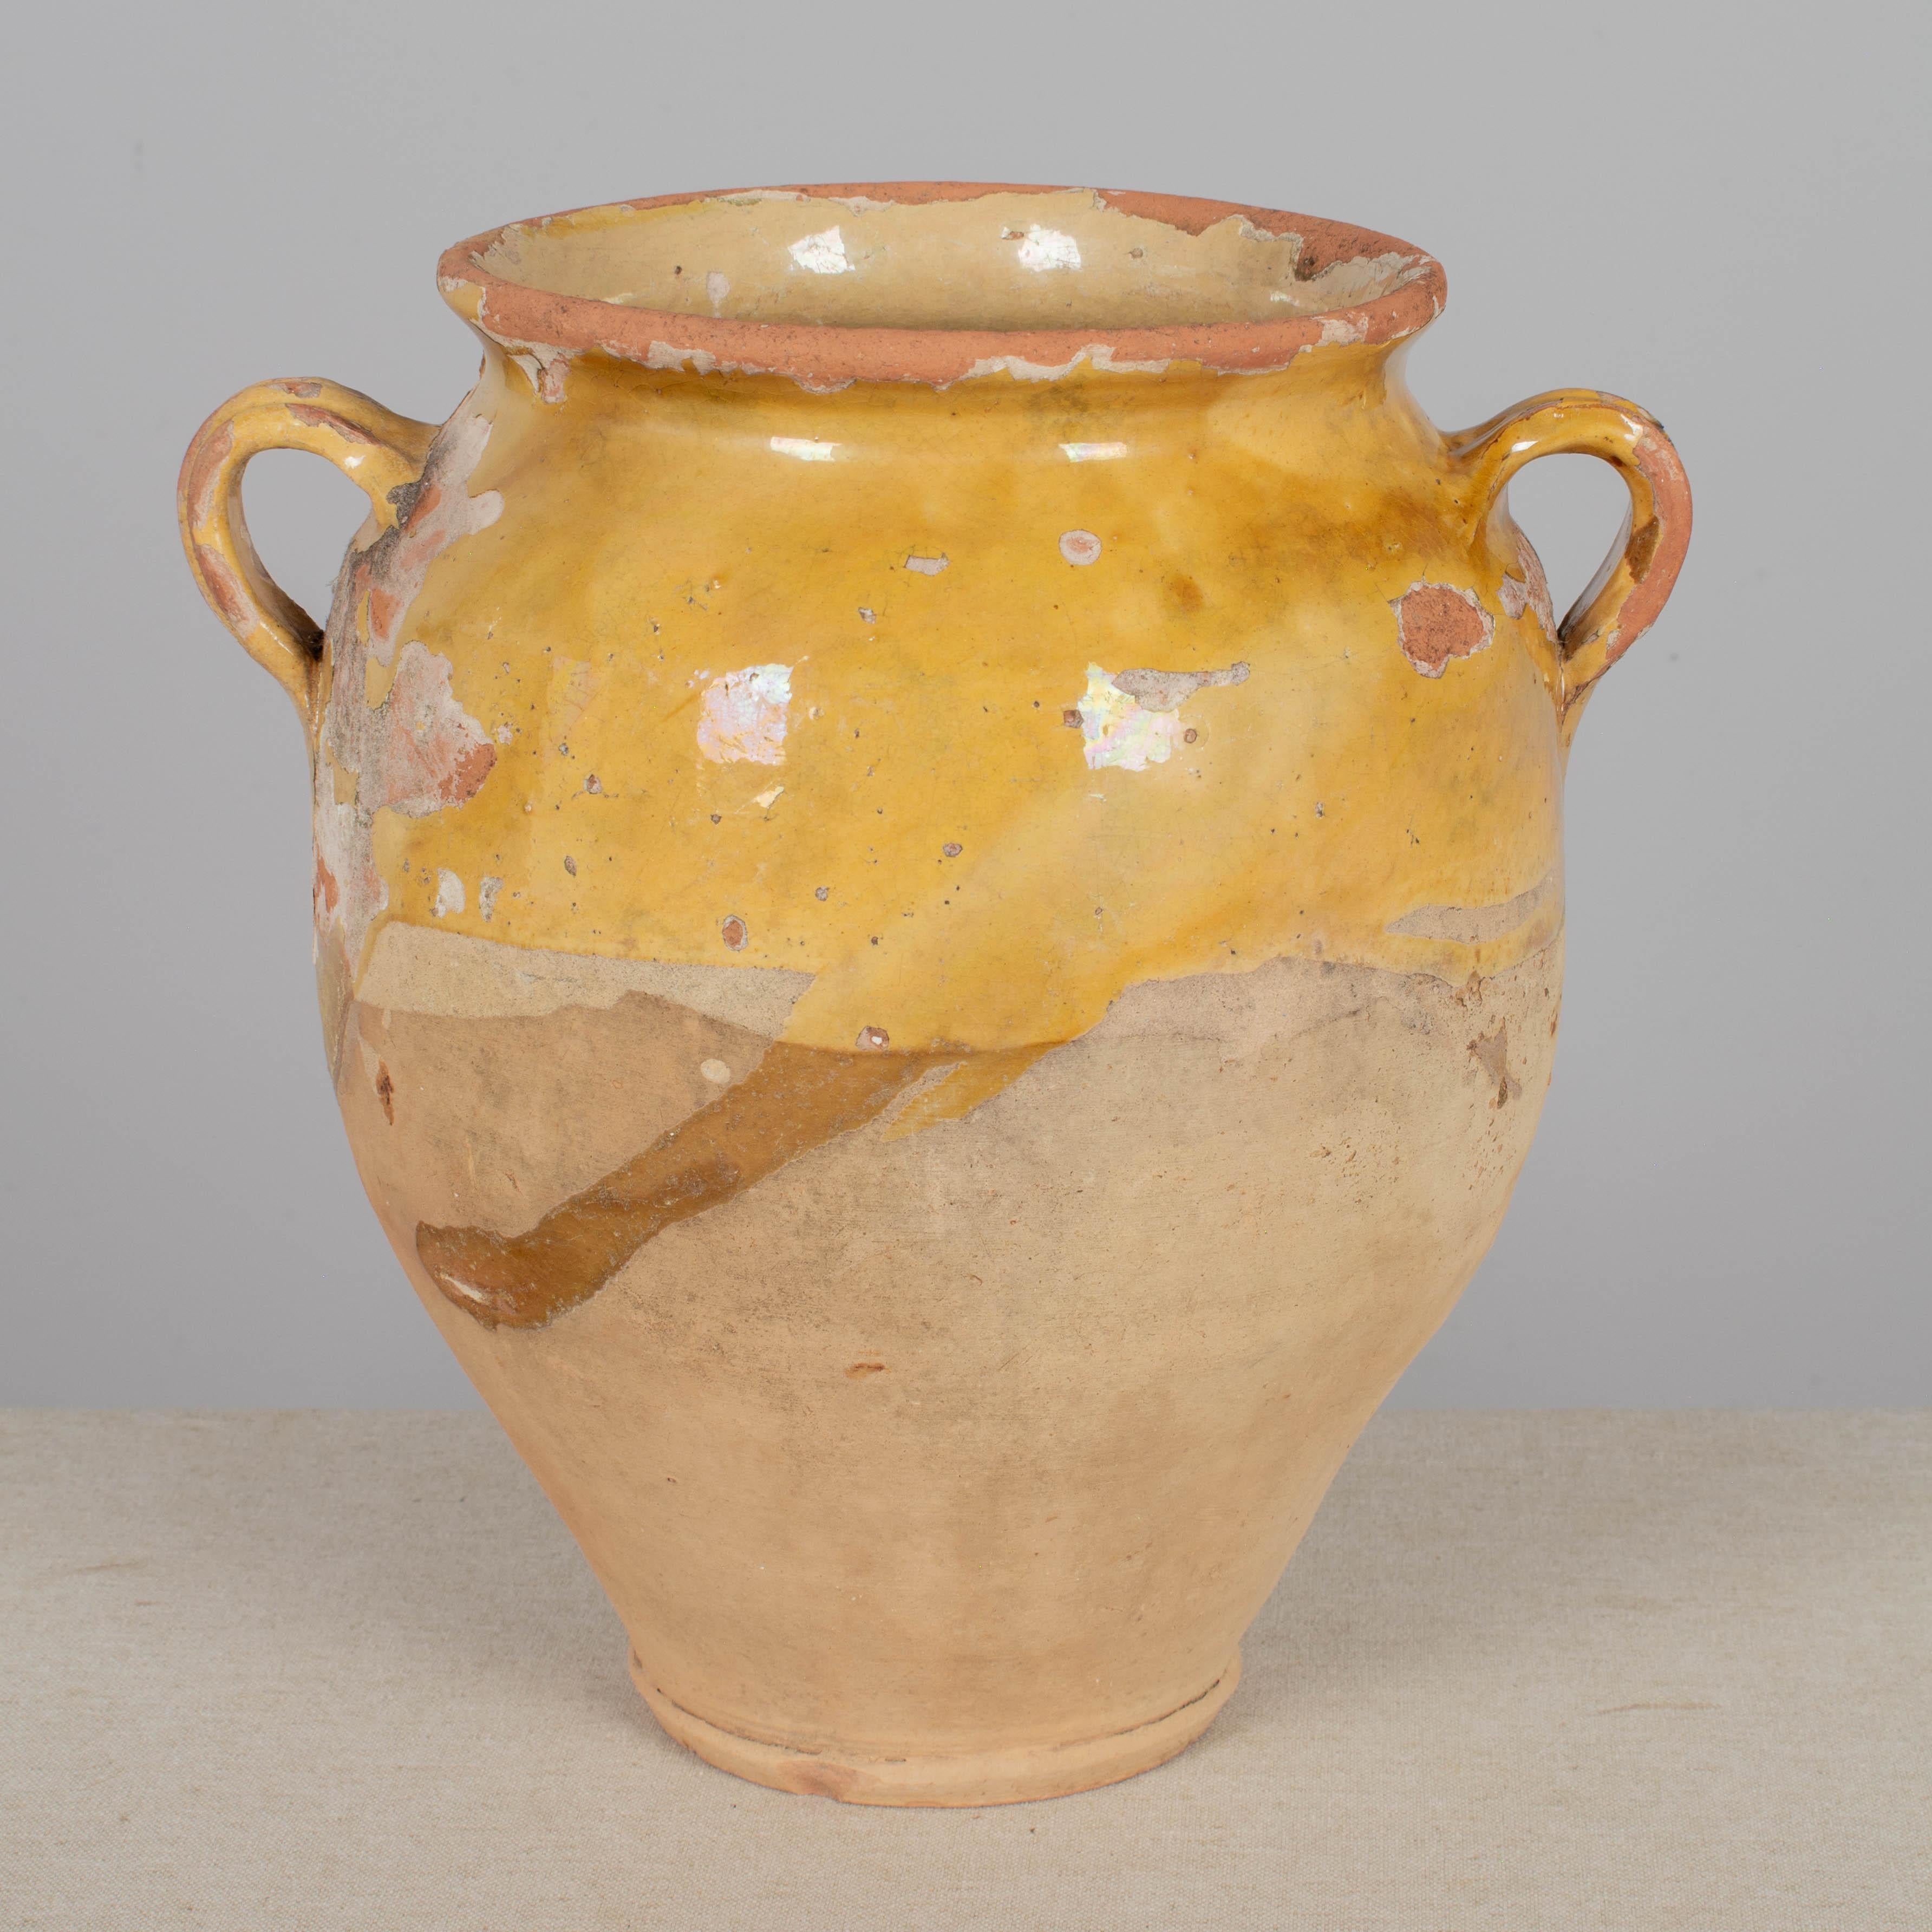 A 19th century French earthenware confit pot with traditional yellow glaze. Small drainage holes in bottom for use as a planter. Some chips and losses to glaze. These ordinary earthenware vessels were once used daily in the French country home and